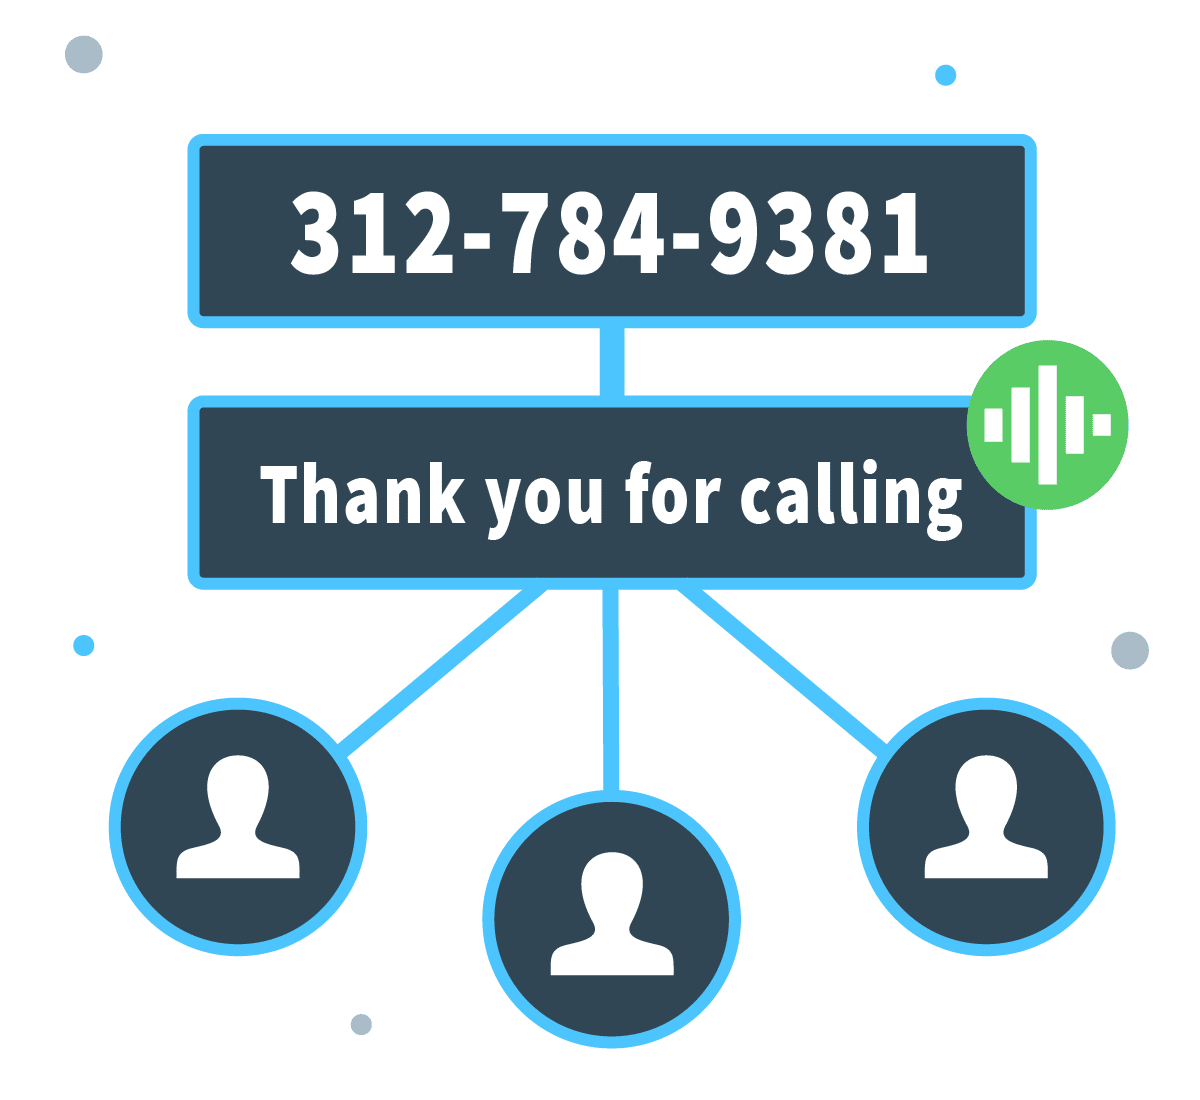 Cheap Phone Service For Small Business